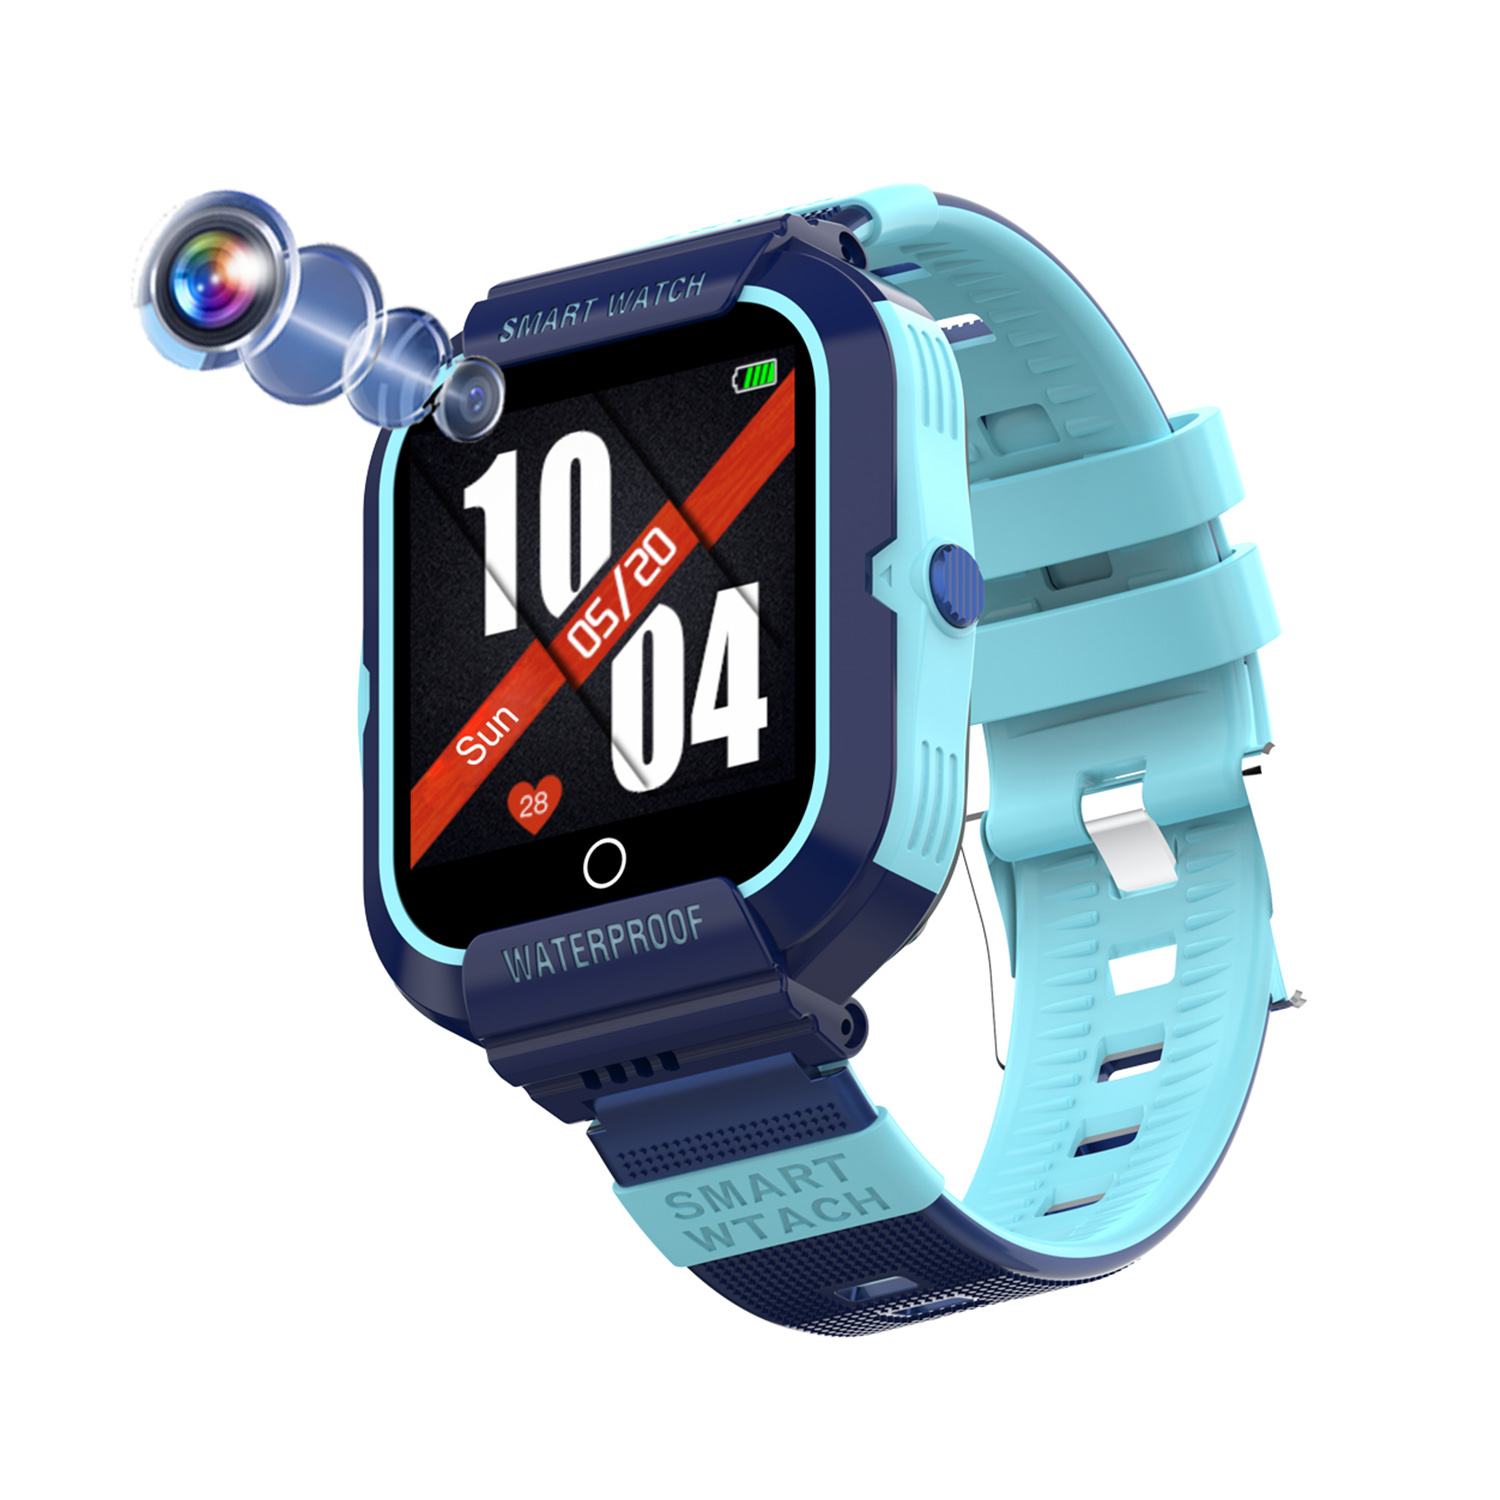 4G Waterproof Students GPS Tracker Watch with HD Camera P42